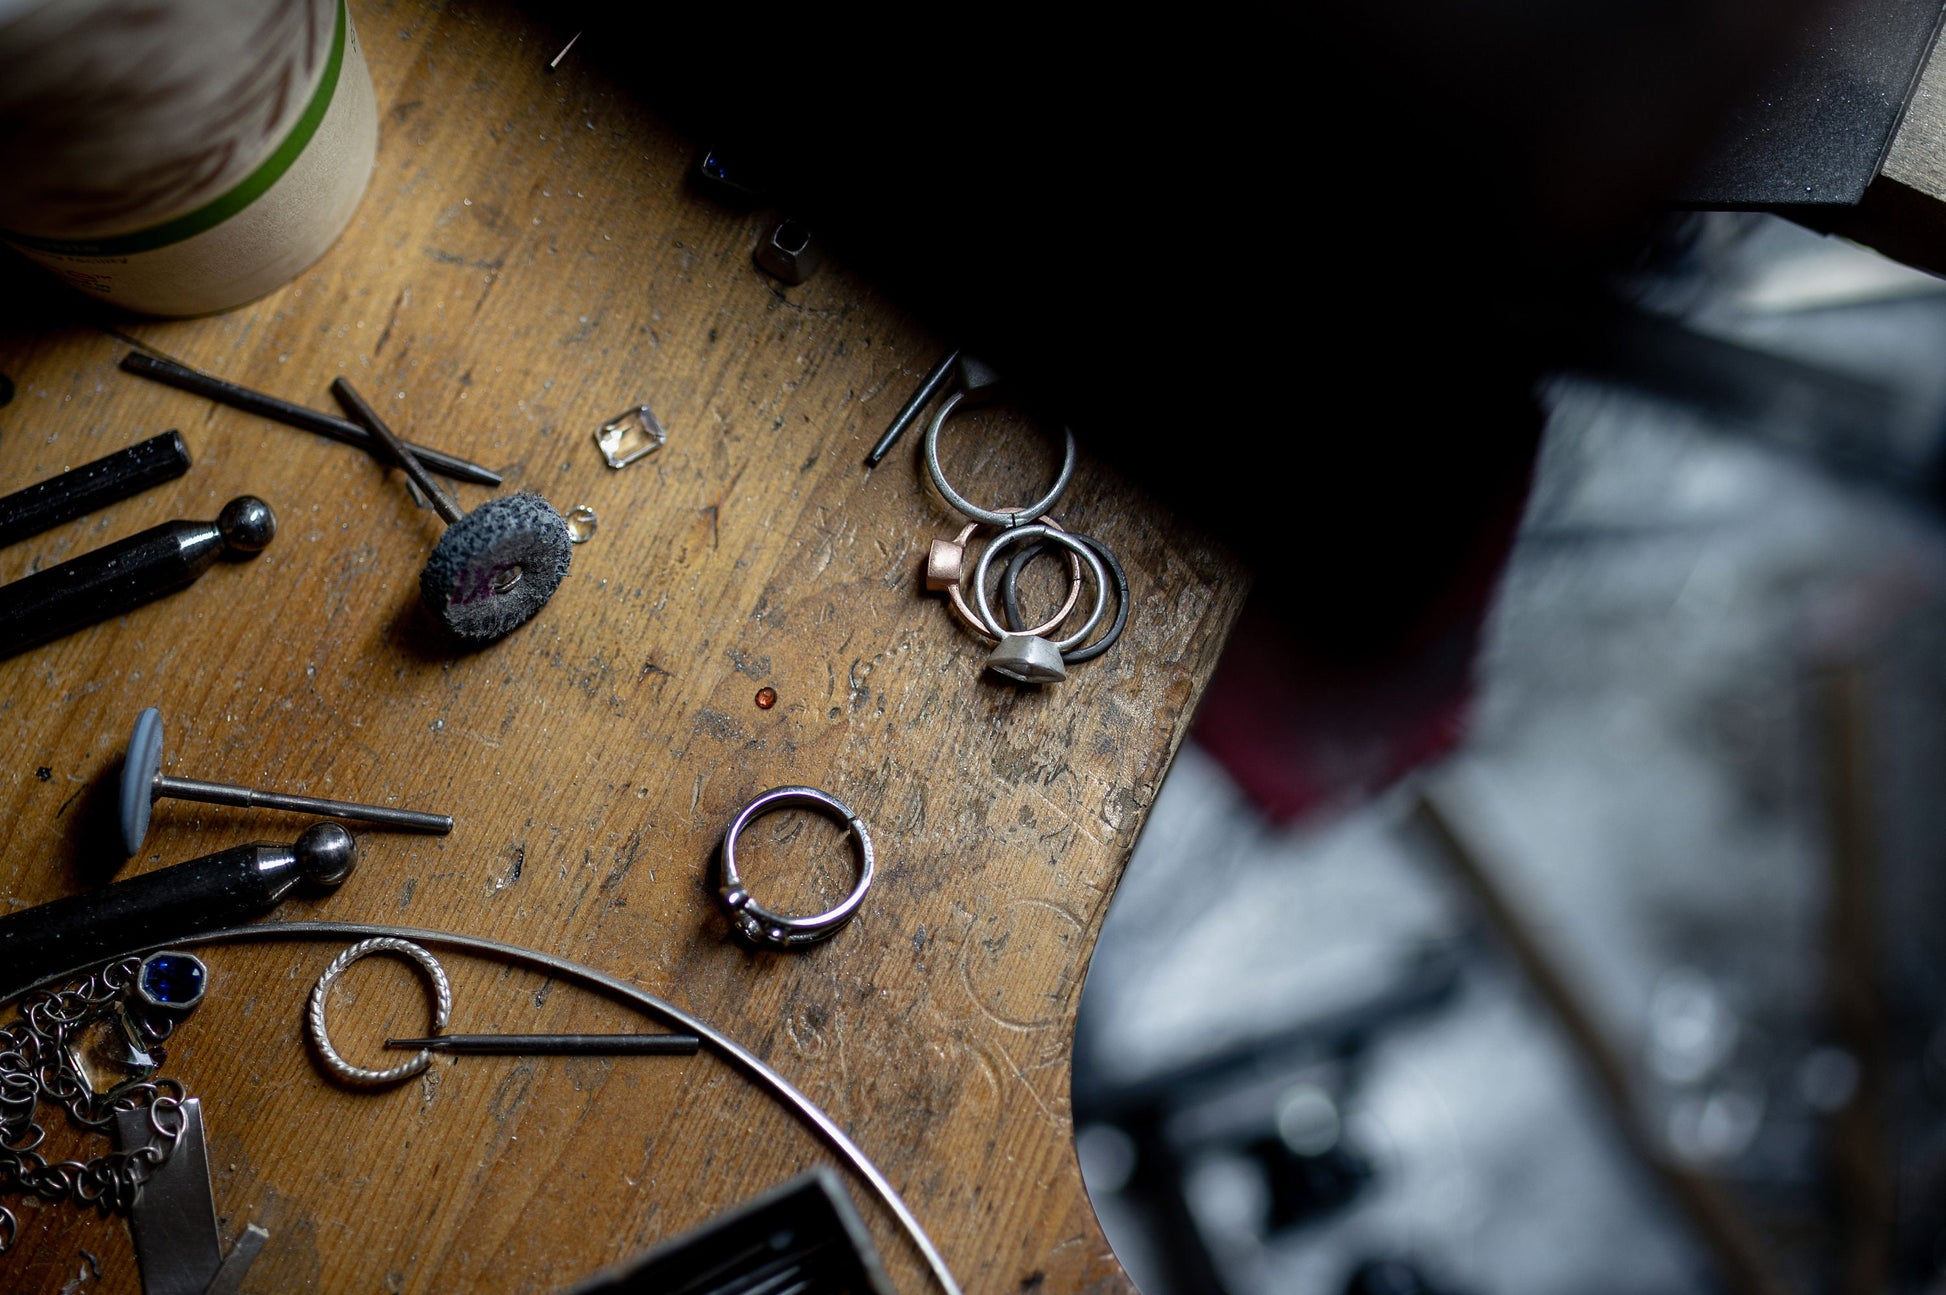 A bunch of handmade Man in the Moon Rose Gold Black Moonstone Rings and tools on a table.